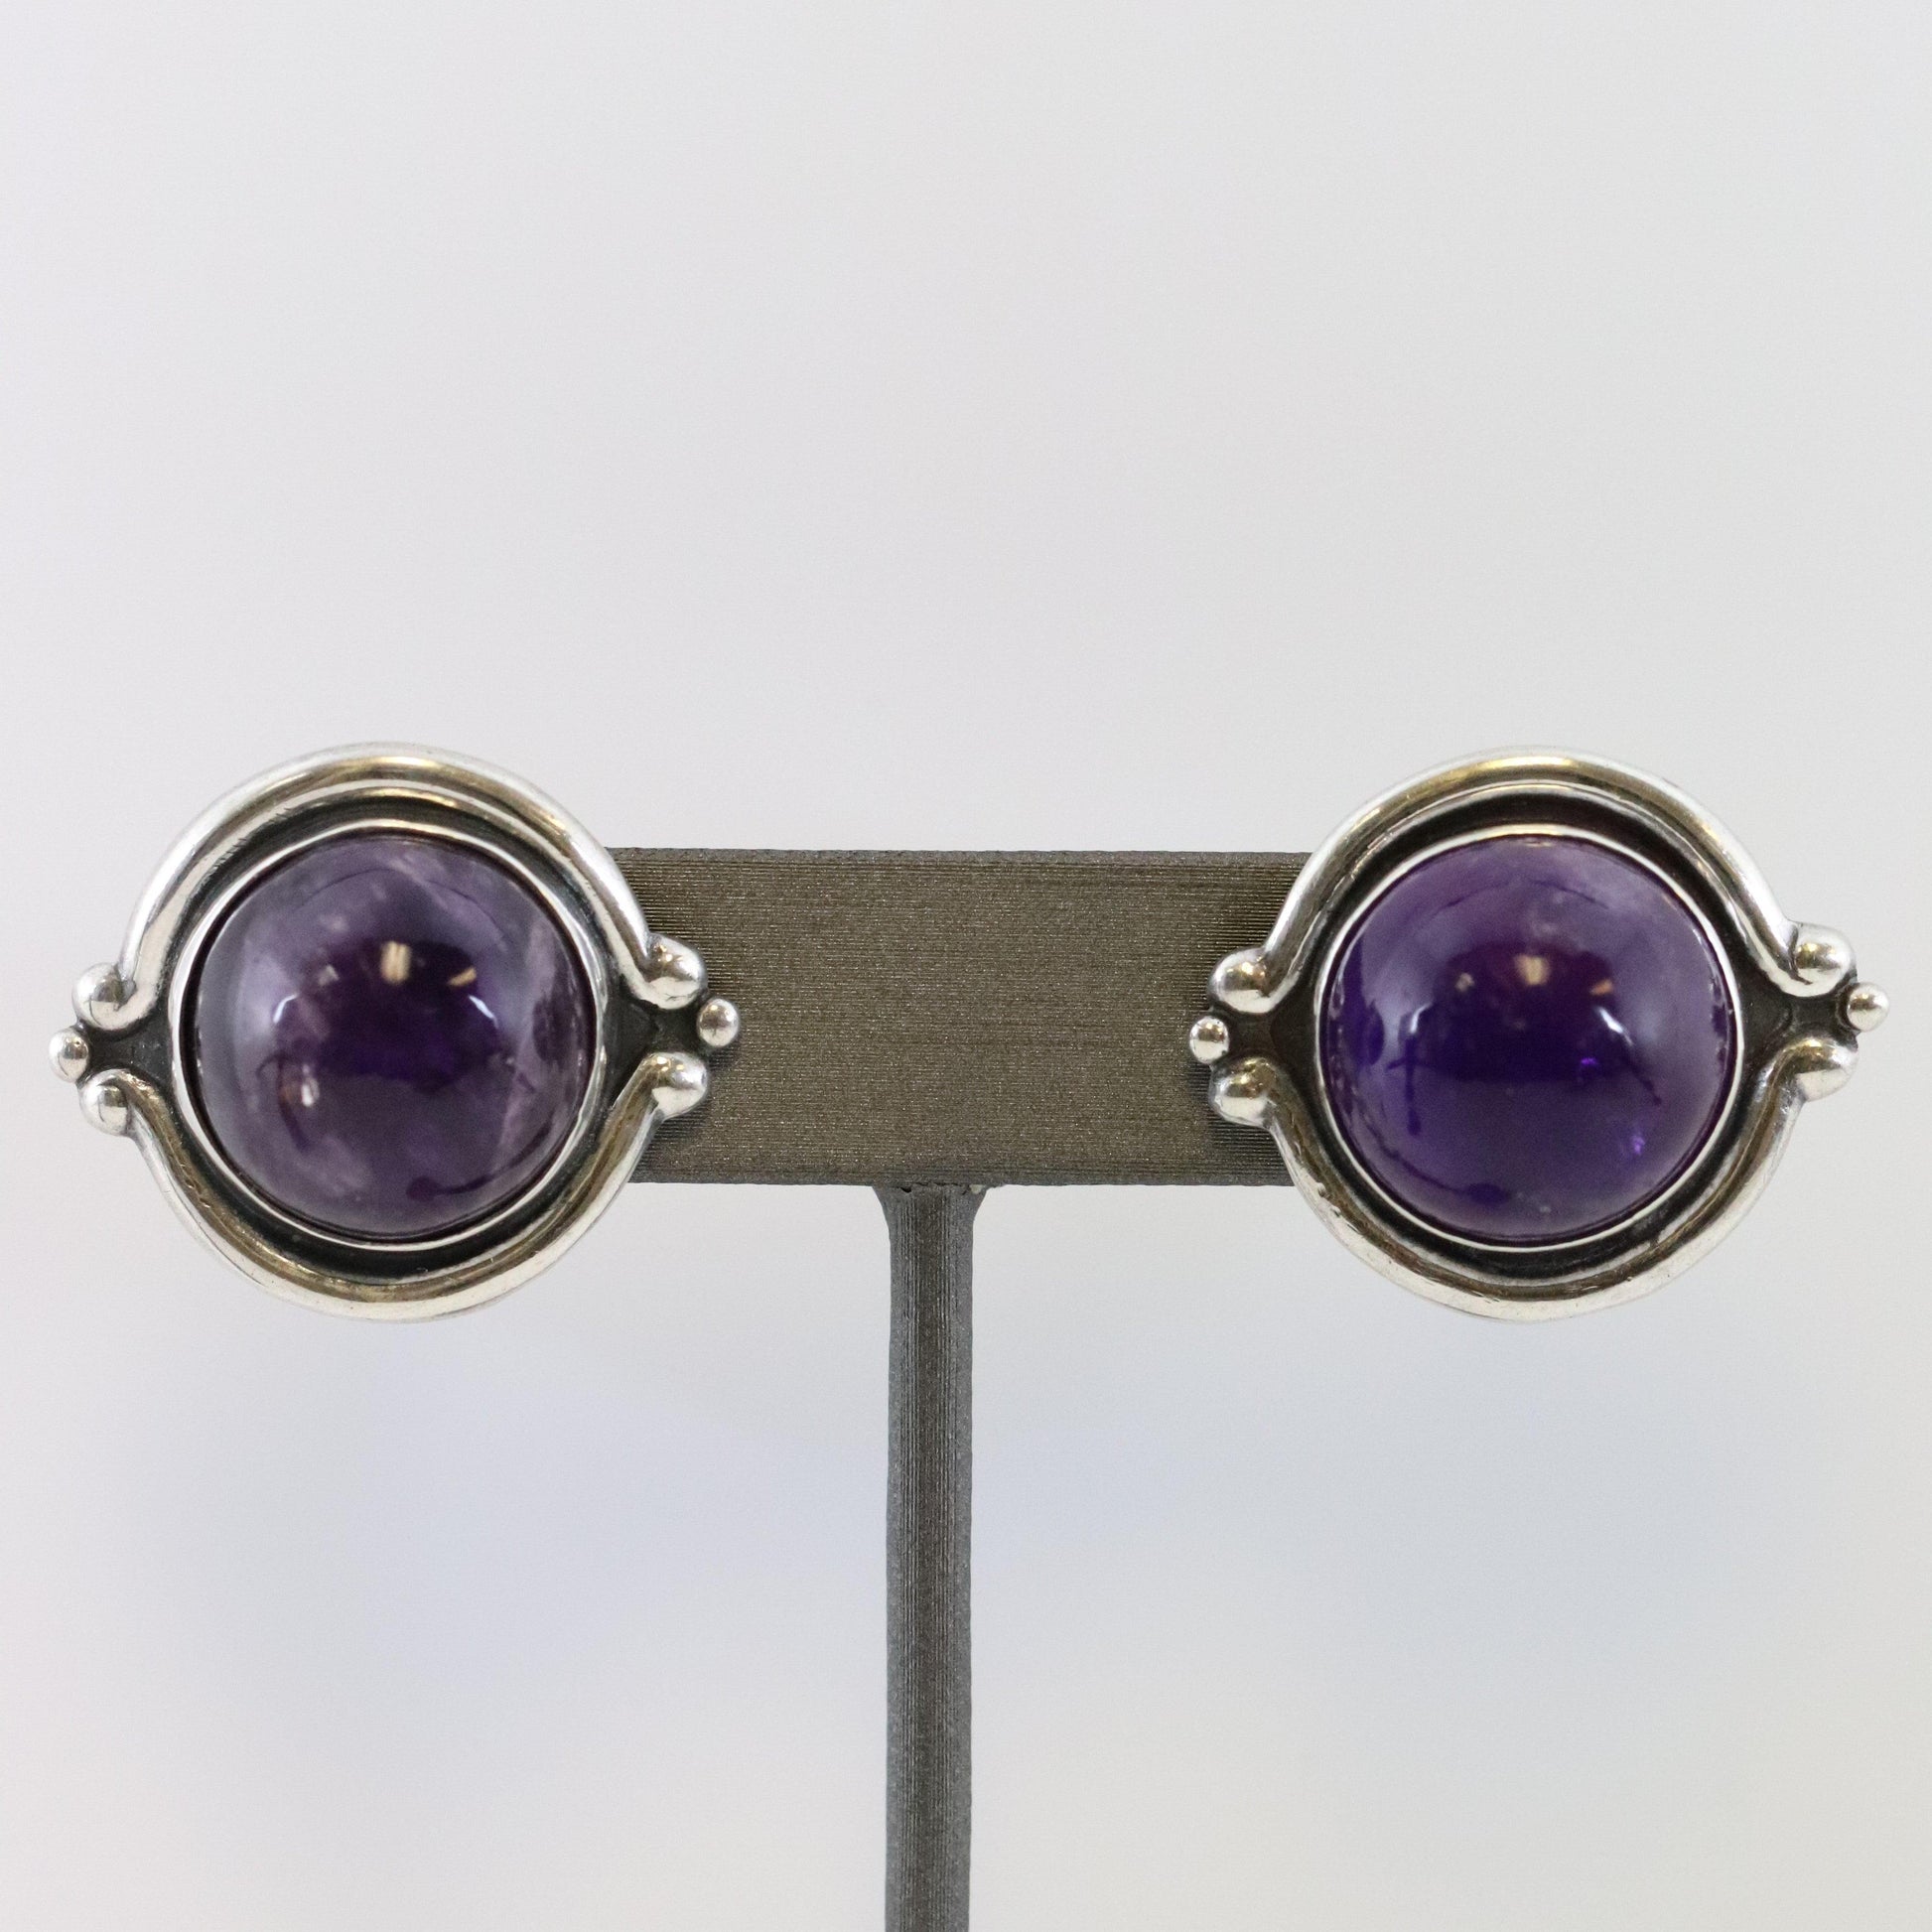 Vintage Los Castillo Taxco Silver Mexican Jewelry | Large Mid Century Amethyst and Silver Earrings - Carmel Fine Silver Jewelry